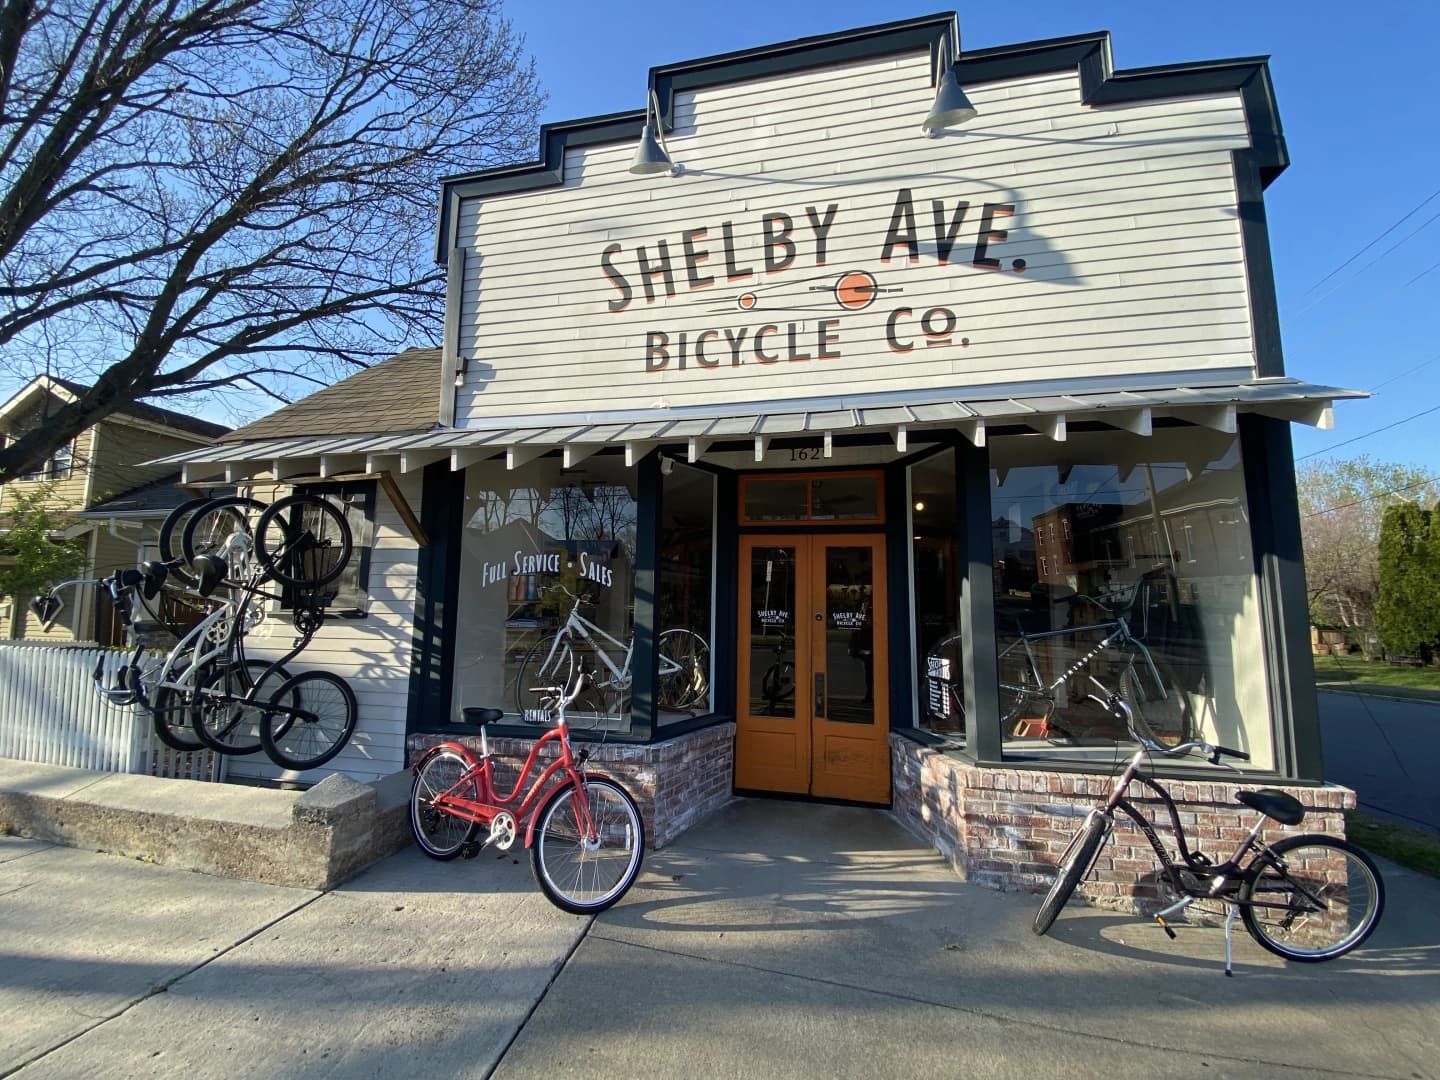 Shelby Ave Bicycle Co